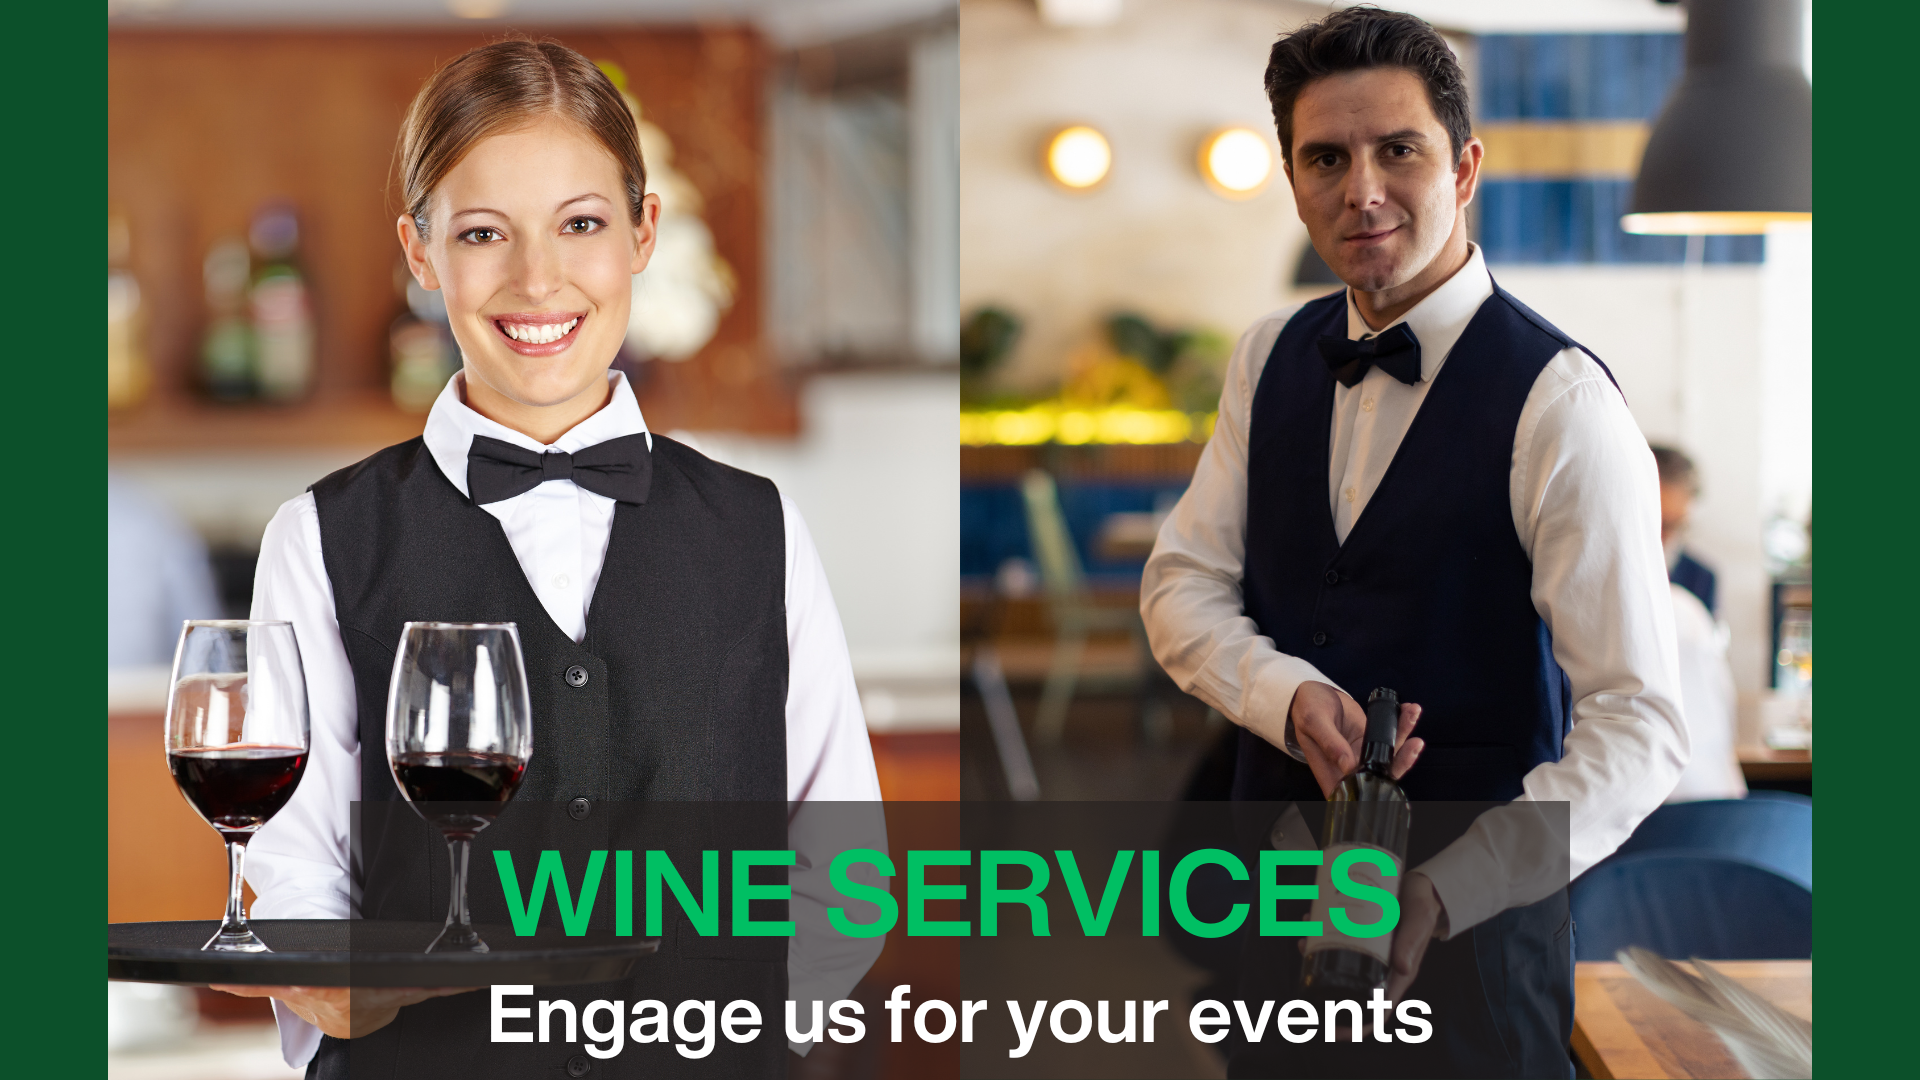 Wine Services by Wine Sommeliers for Wine Events